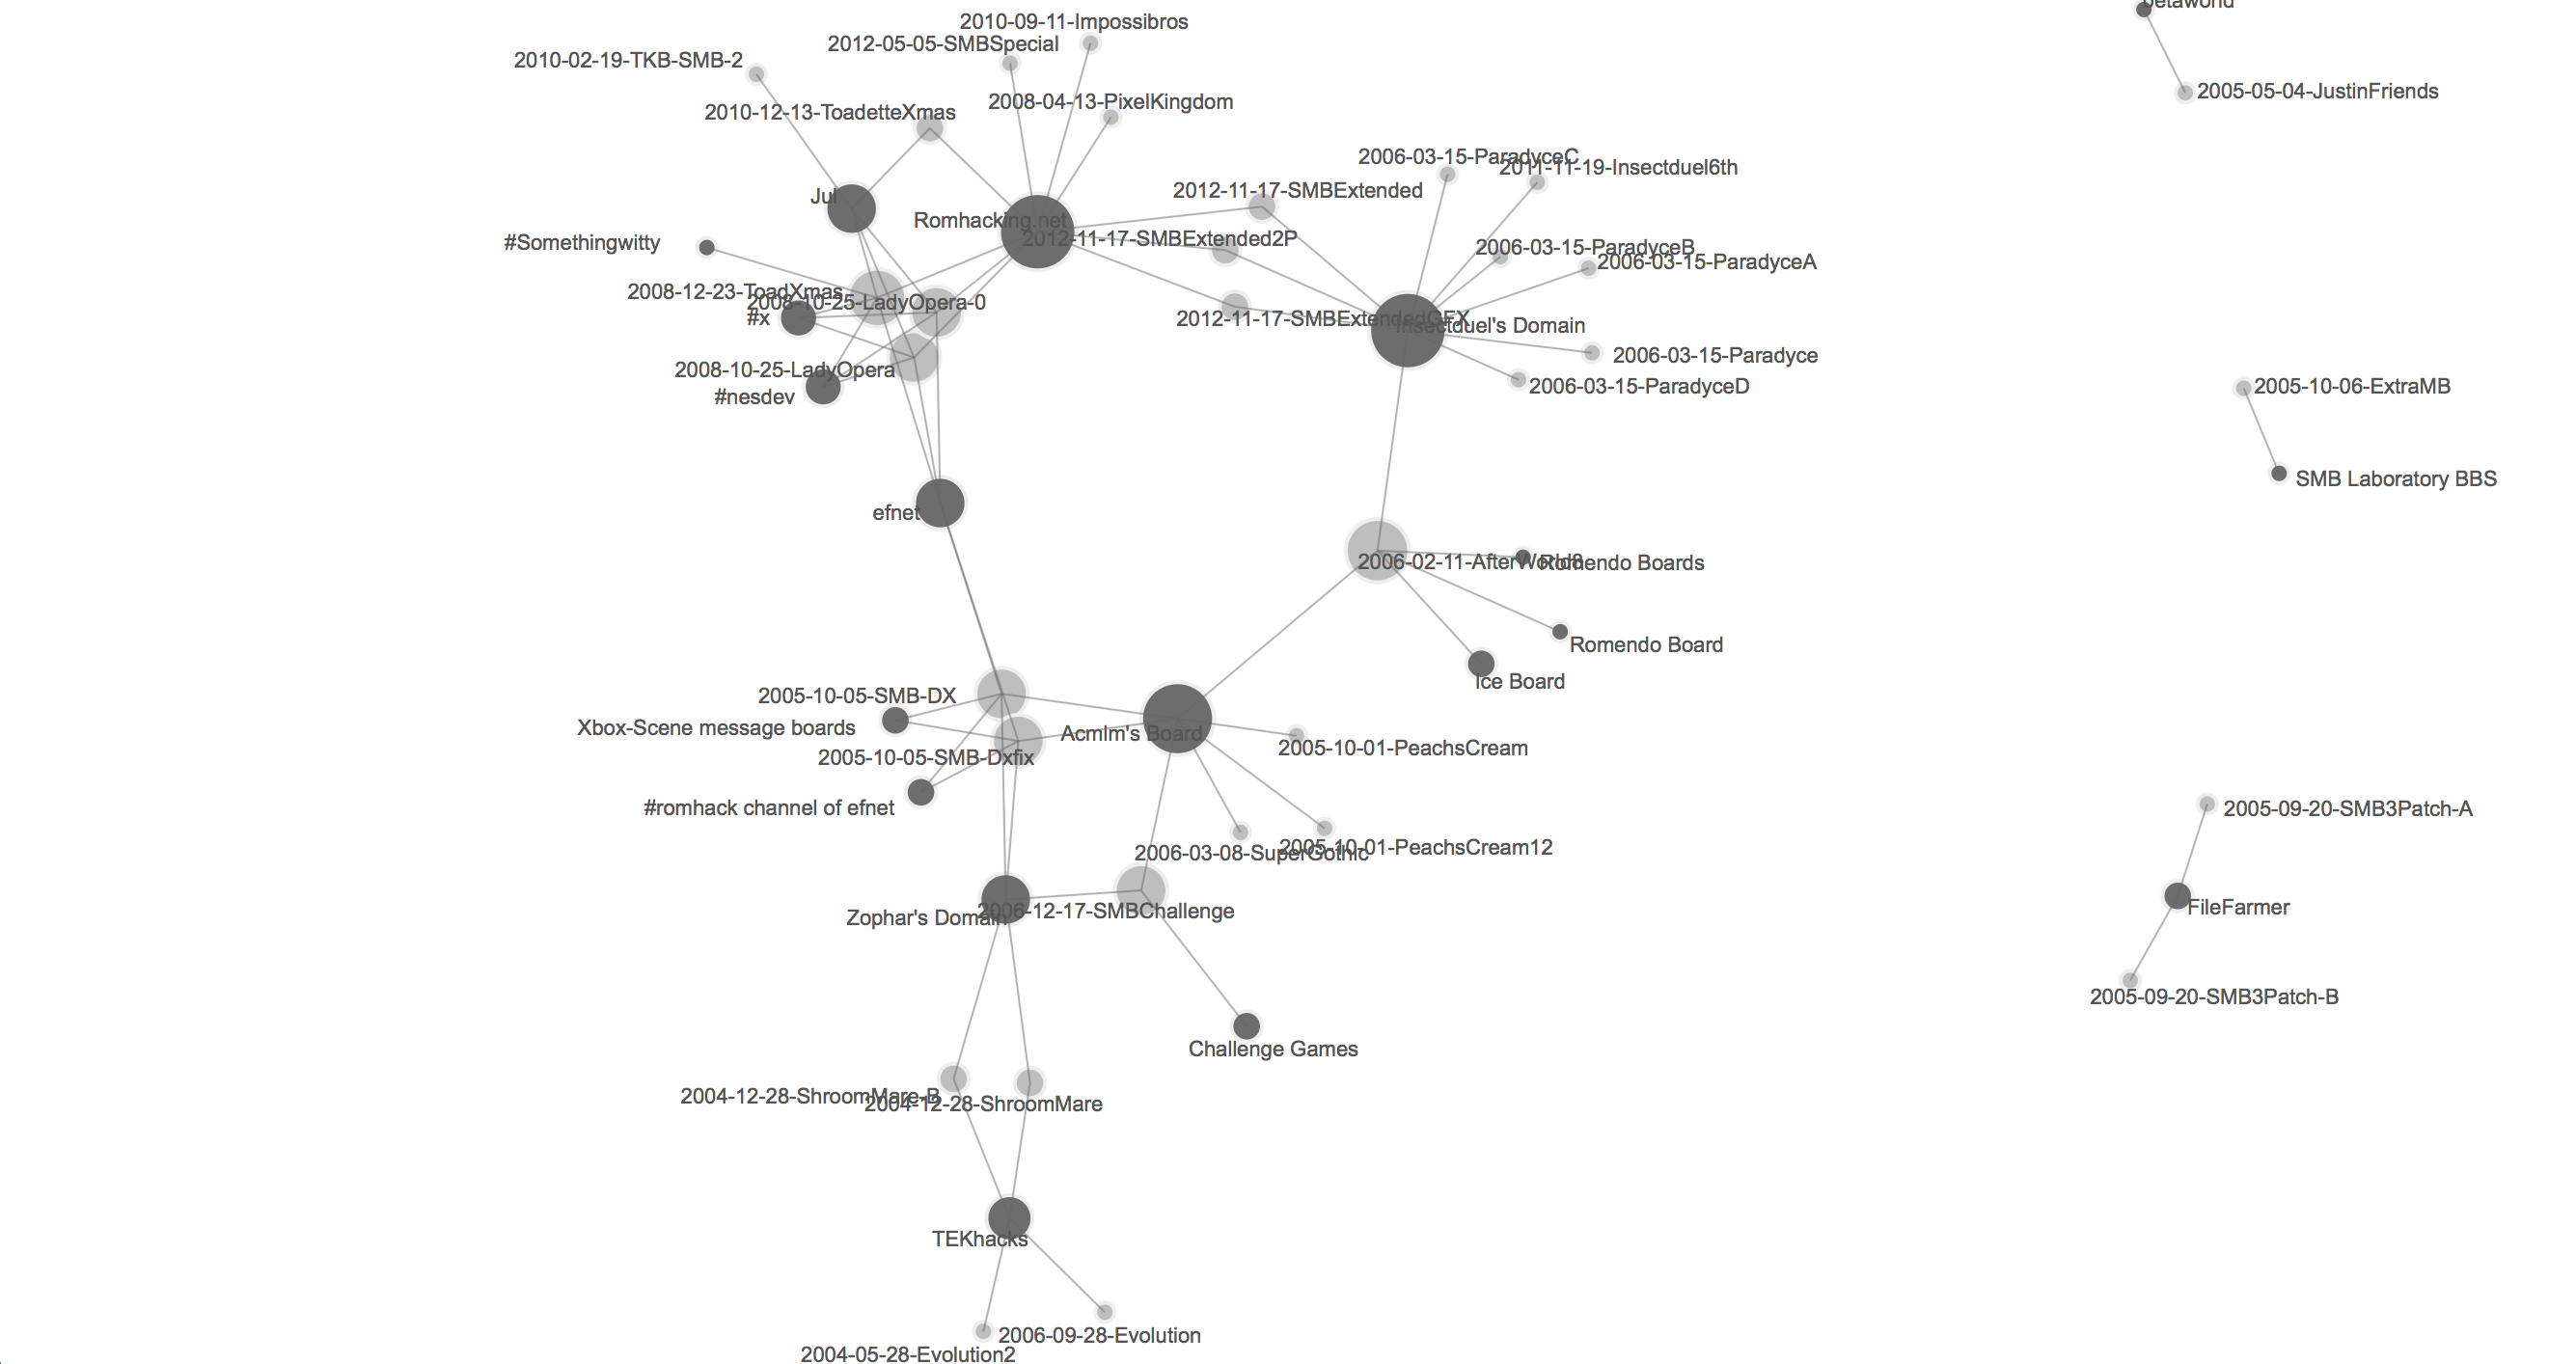 Screenshot: Palladio network graph of references to other modding communities